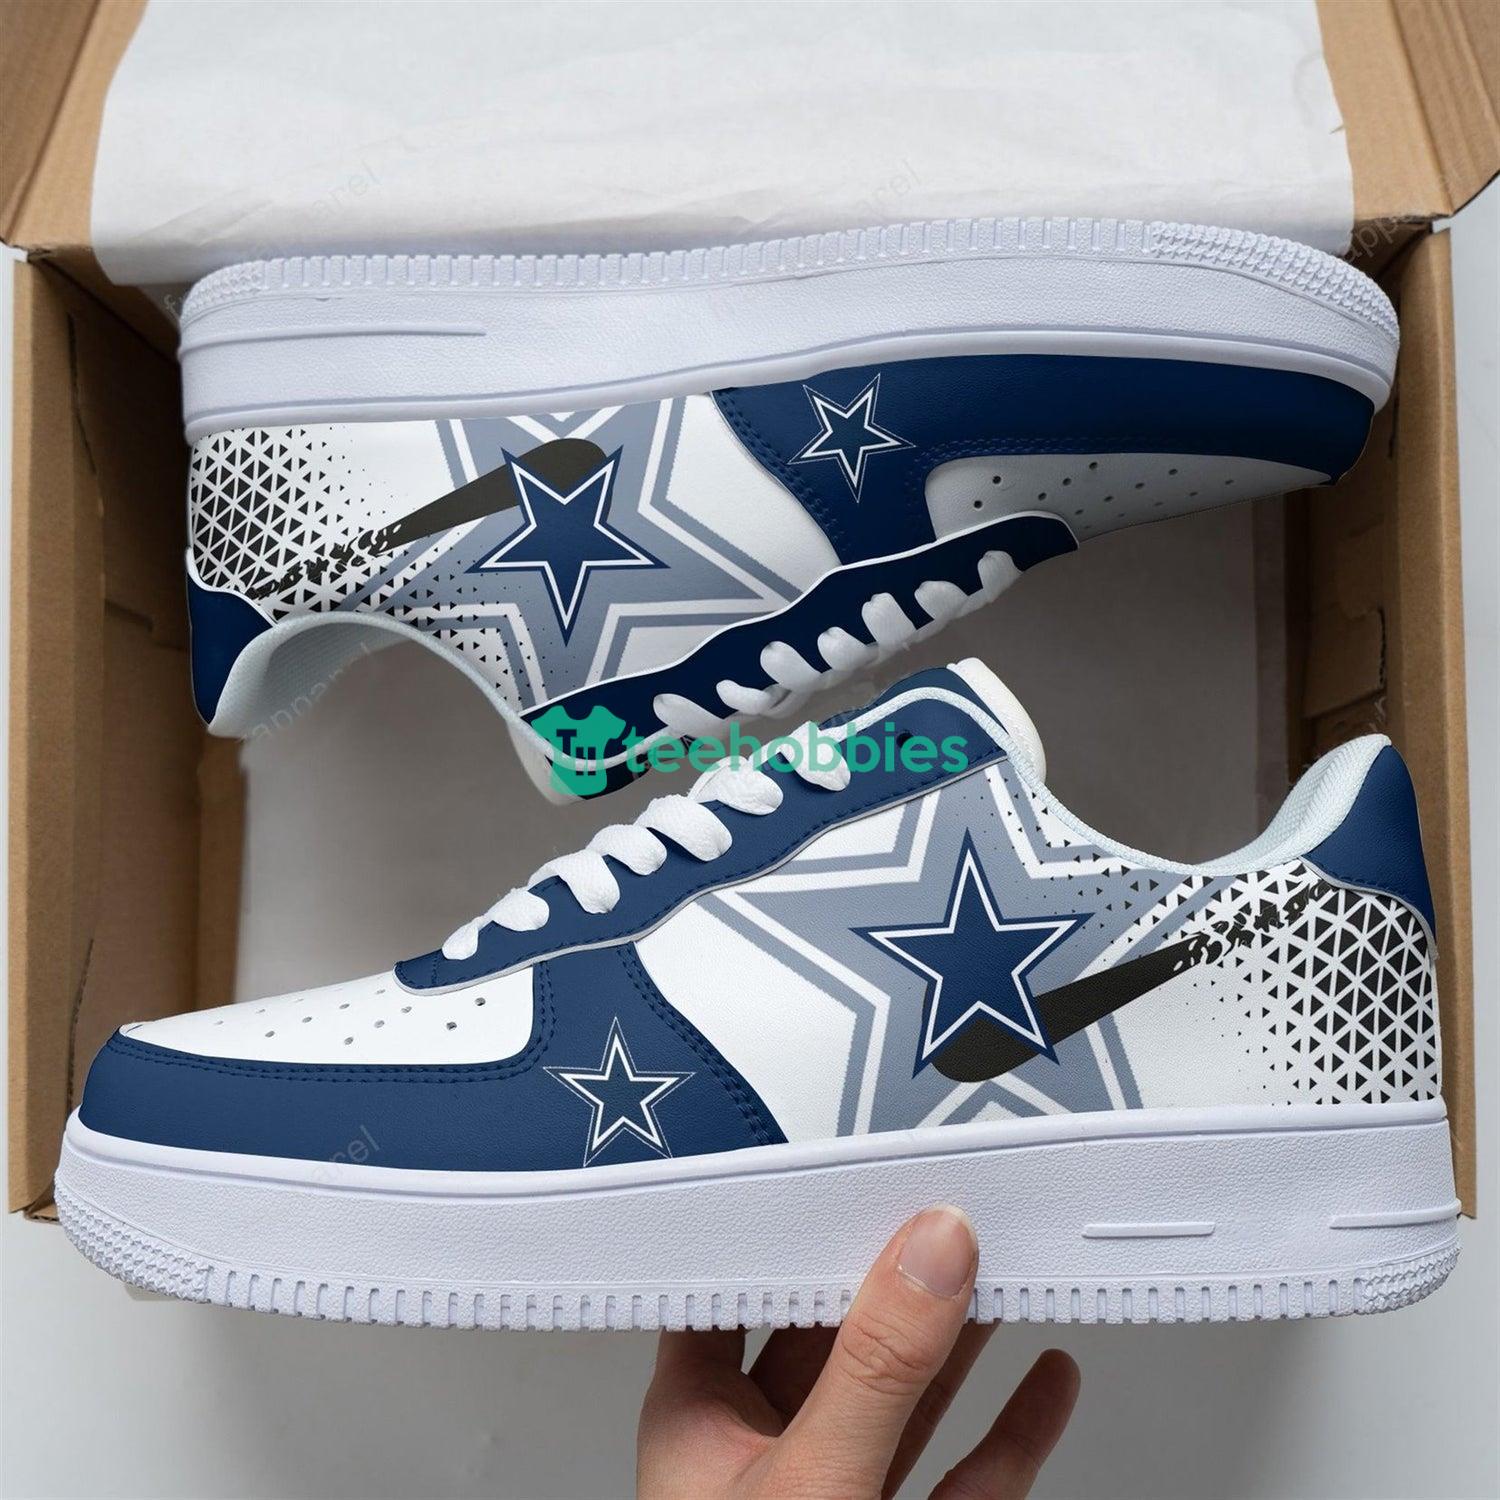 Logo Dallas Cowboys Team Best Gift Air Force Shoes For Fans Product Photo 1 Product photo 1